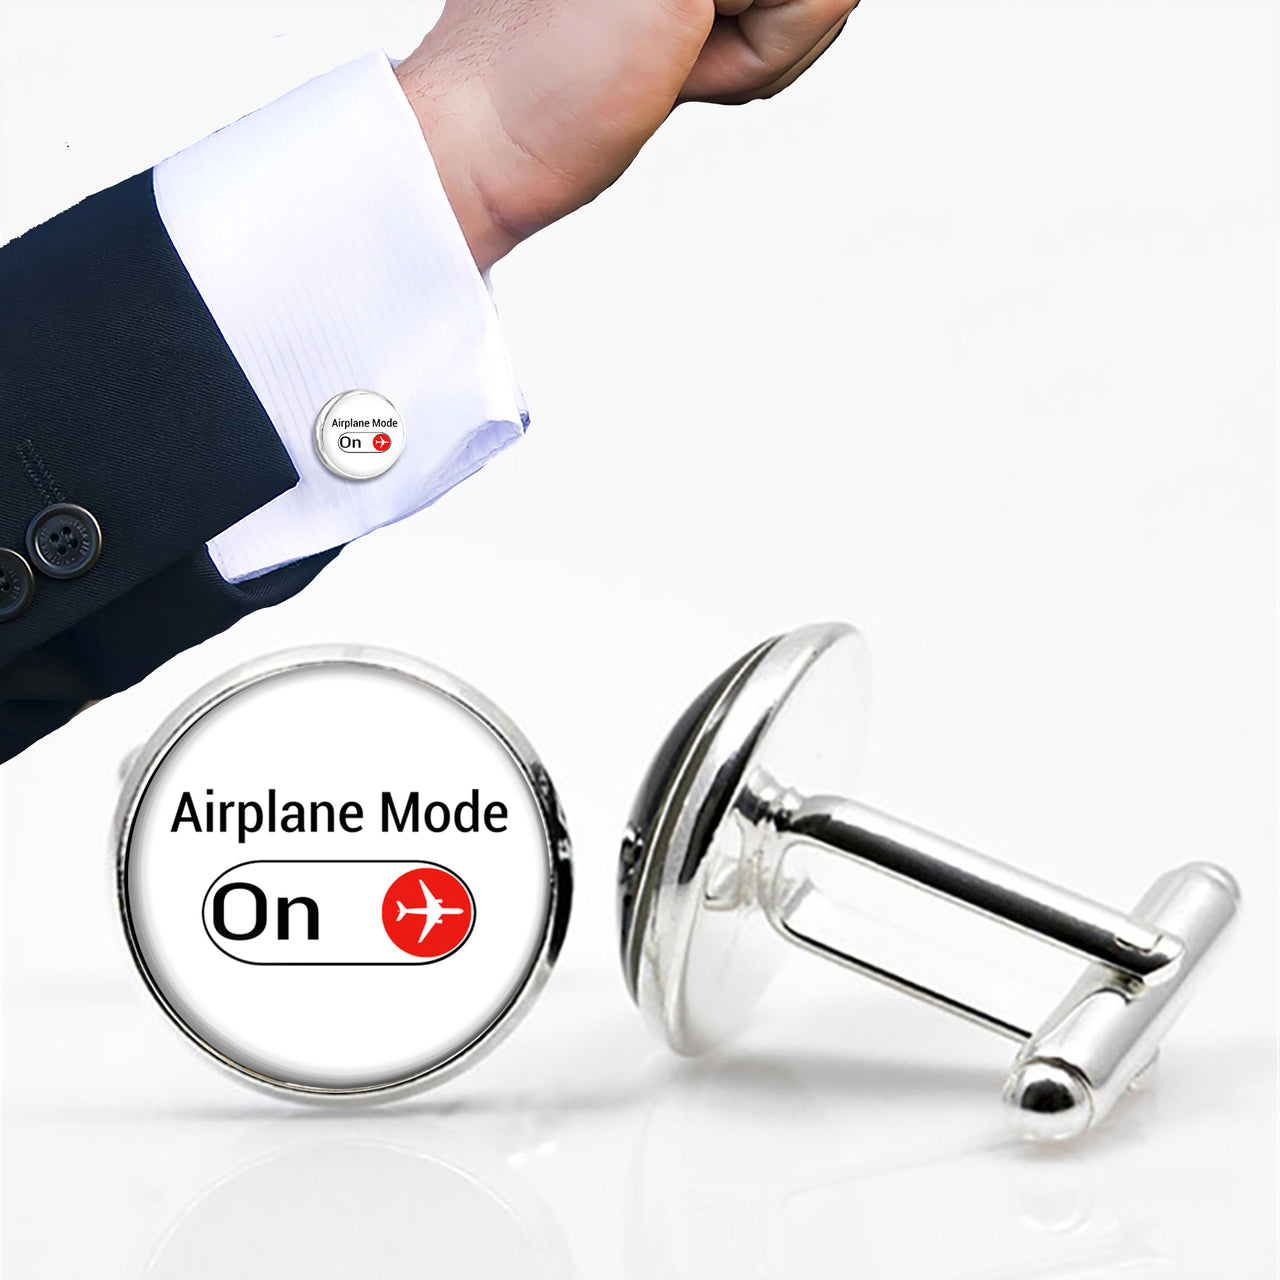 Airplane Mode On Designed Cuff Links